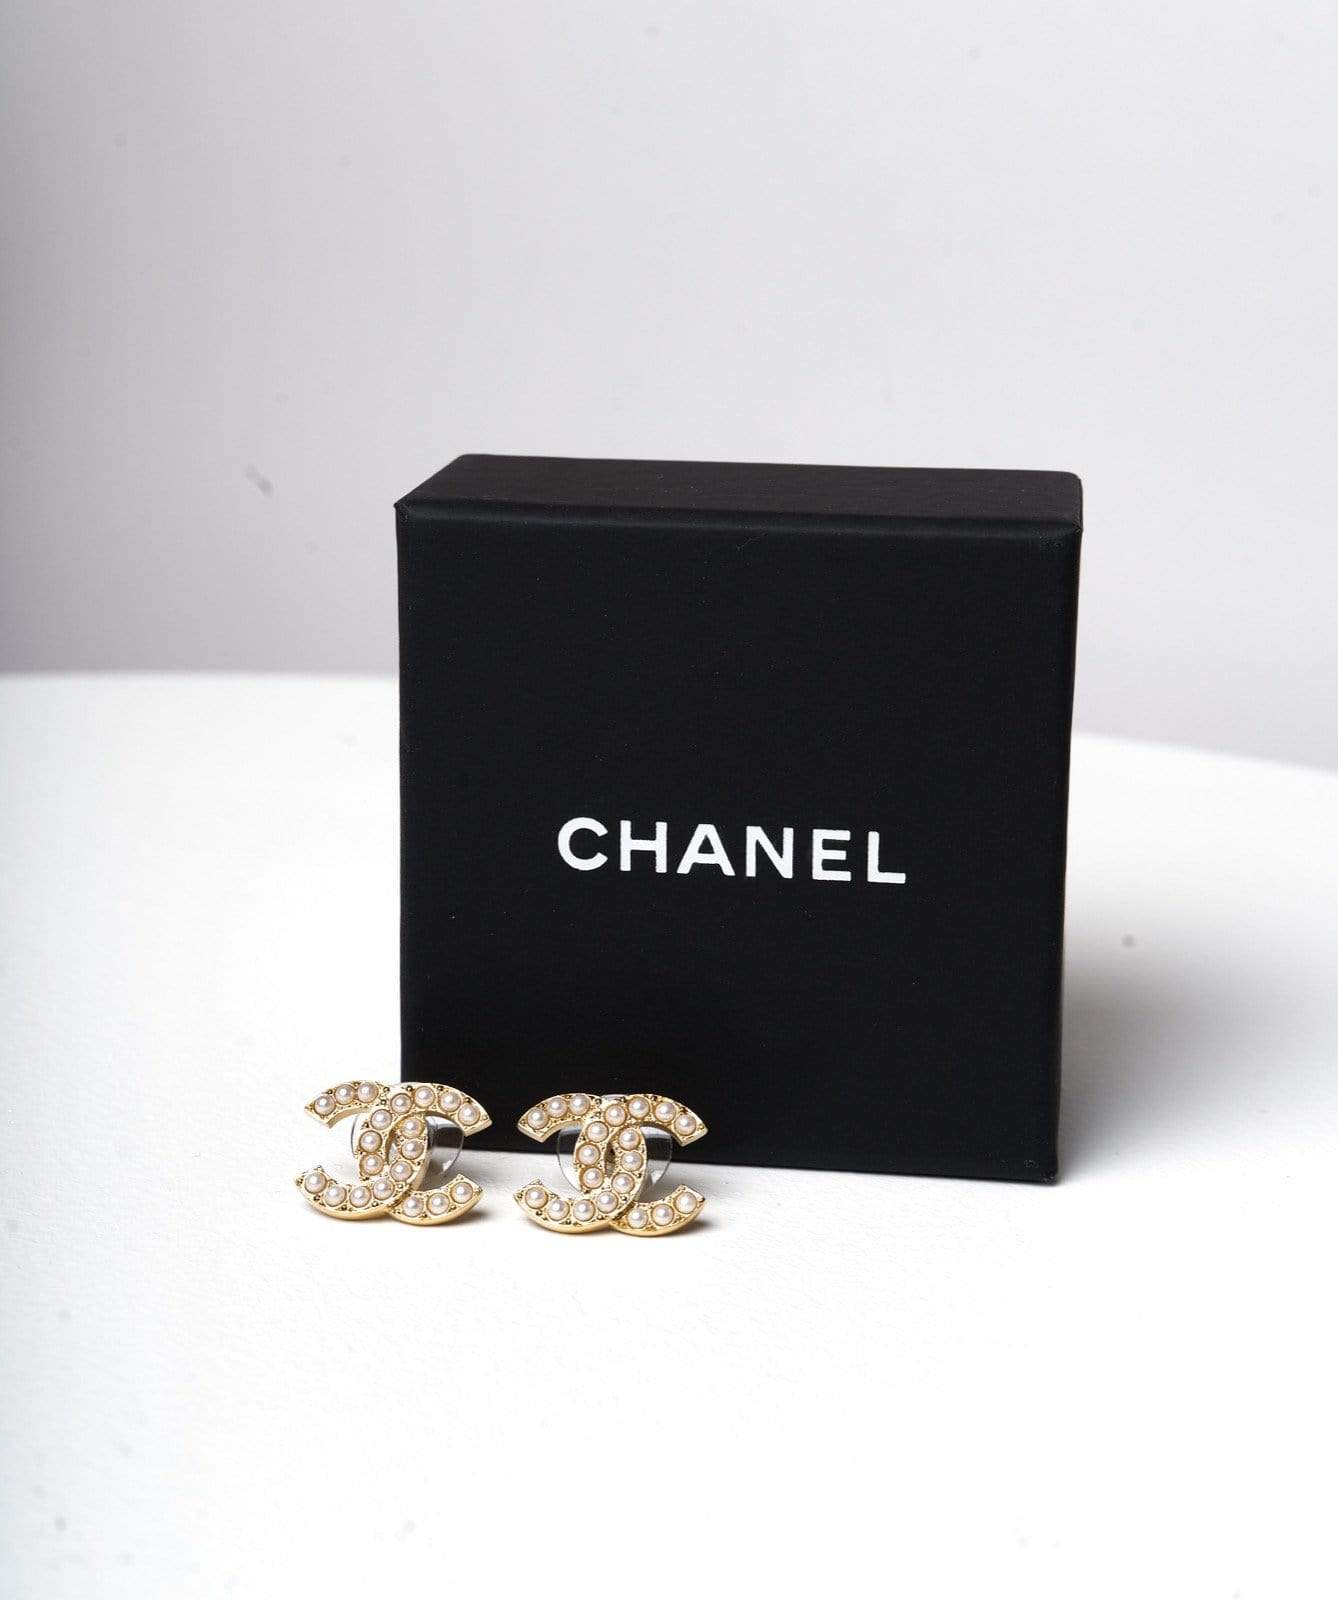 Chanel Chanel CC yellow gold and pearl earrings